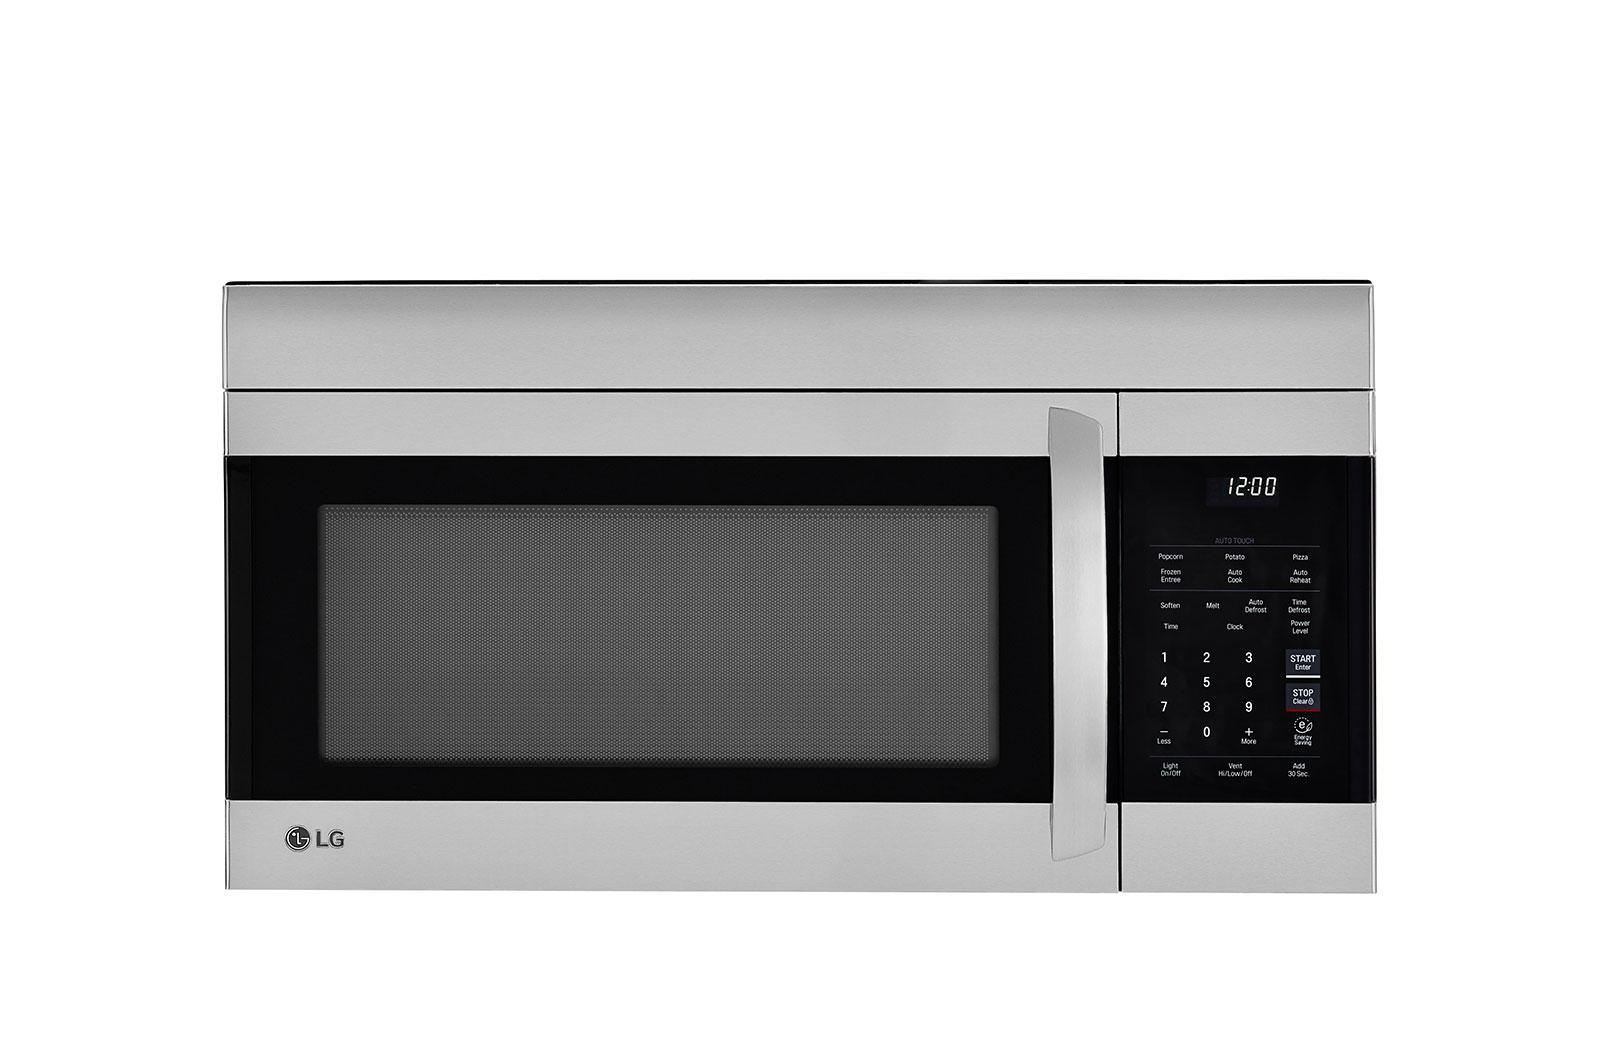 Lg 1.7 cu. ft. Over-the-Range Microwave Oven with EasyClean®